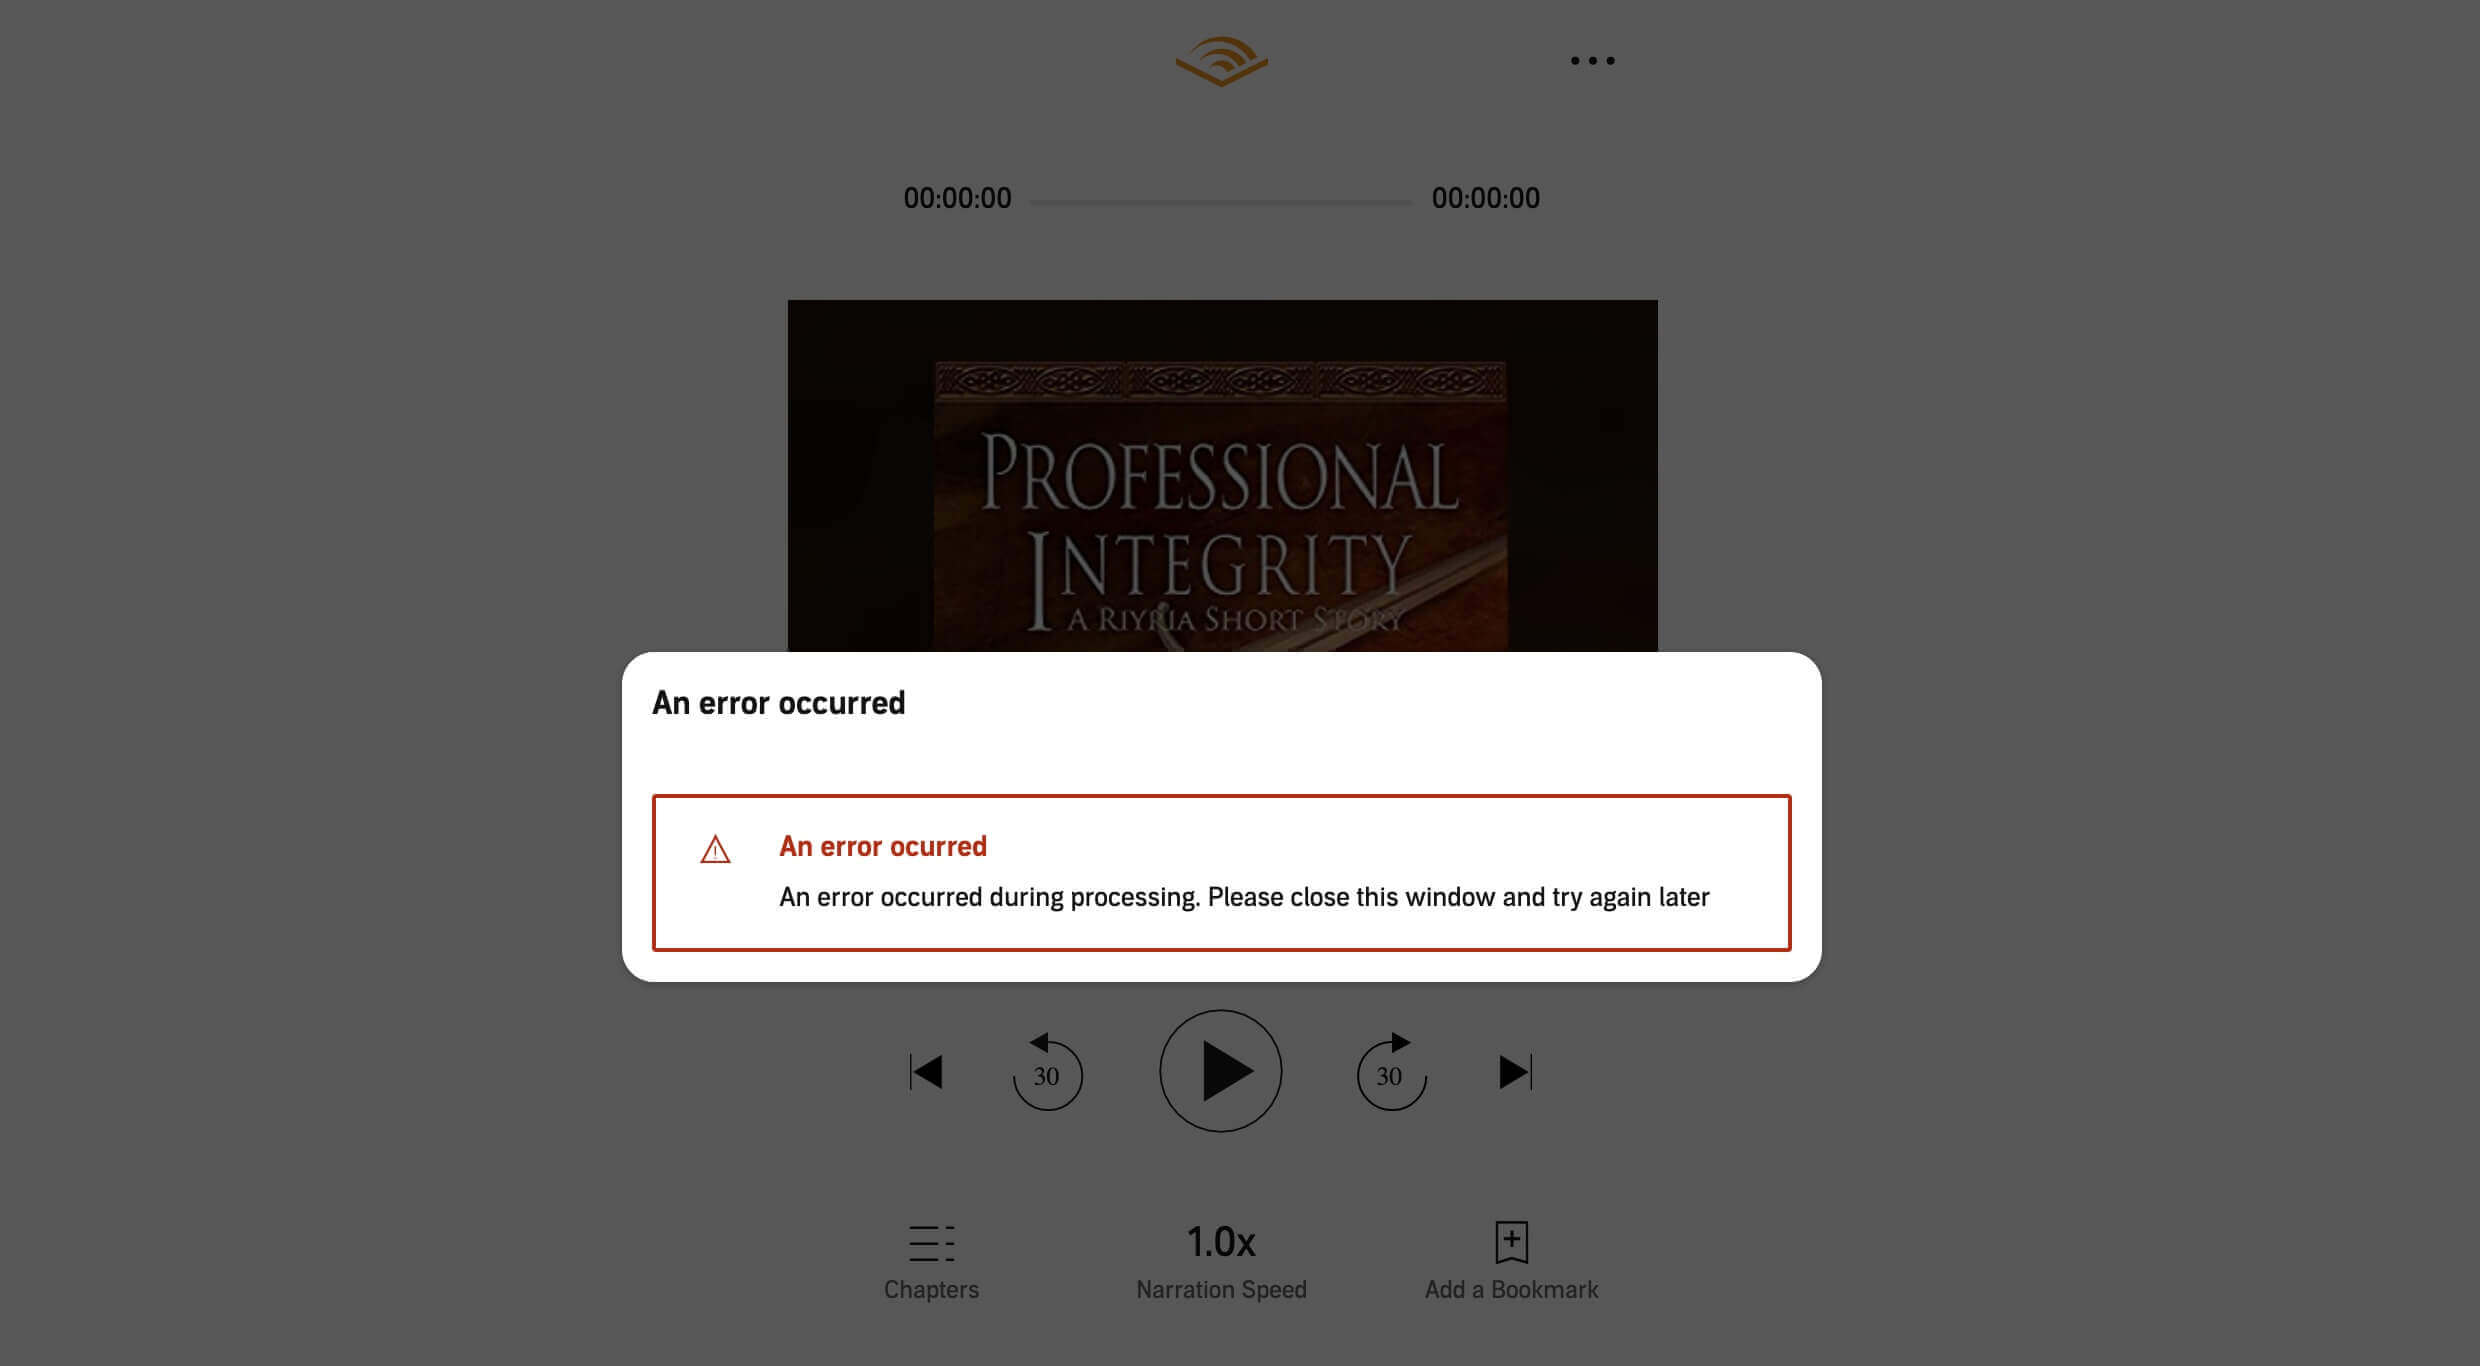 Listen to Audible on Mac using Cloud Player